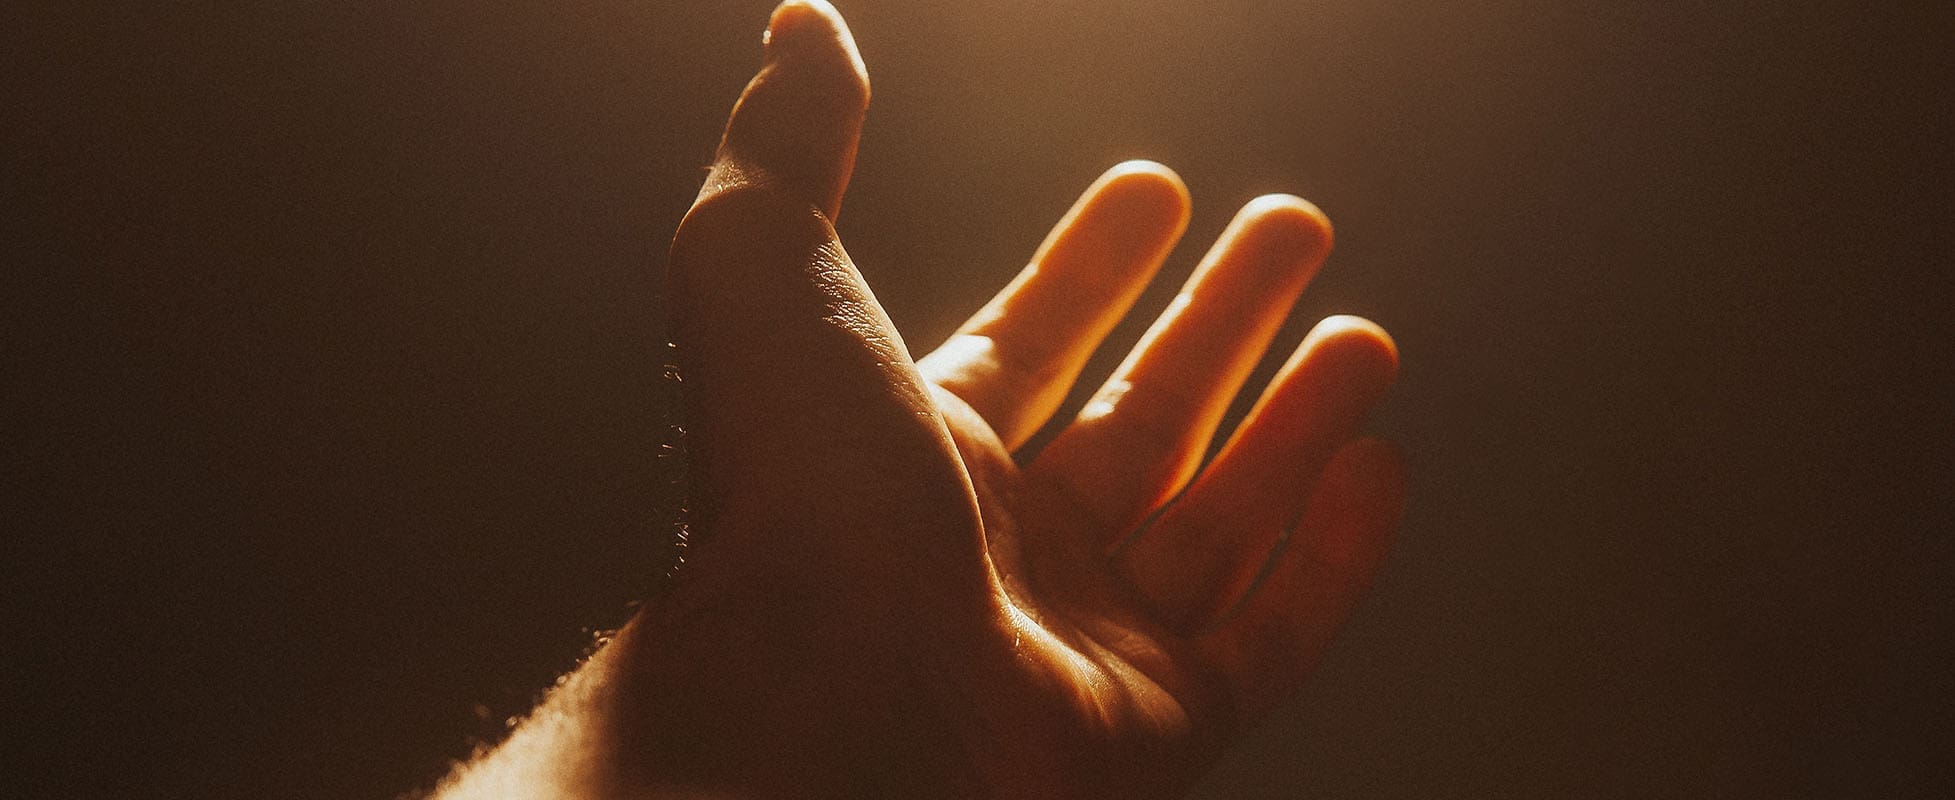 person holding hand in sunlight